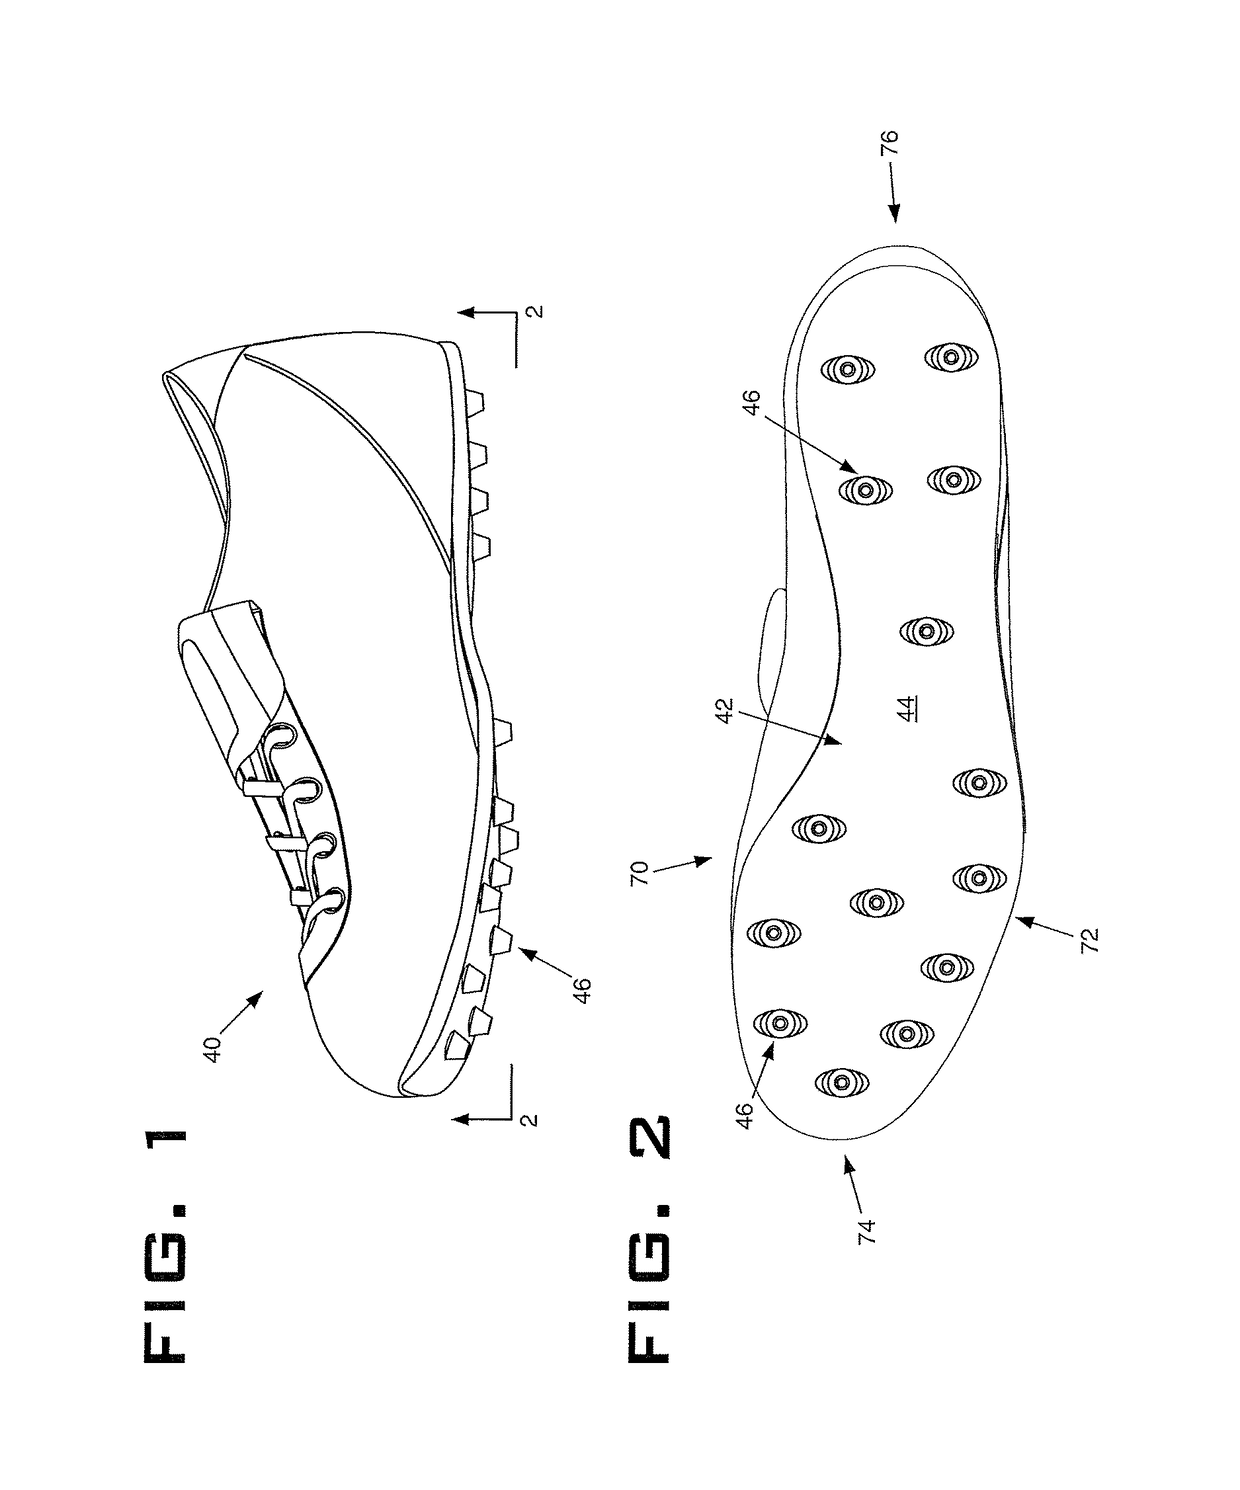 Athletic shoe with an attached moveable cleat